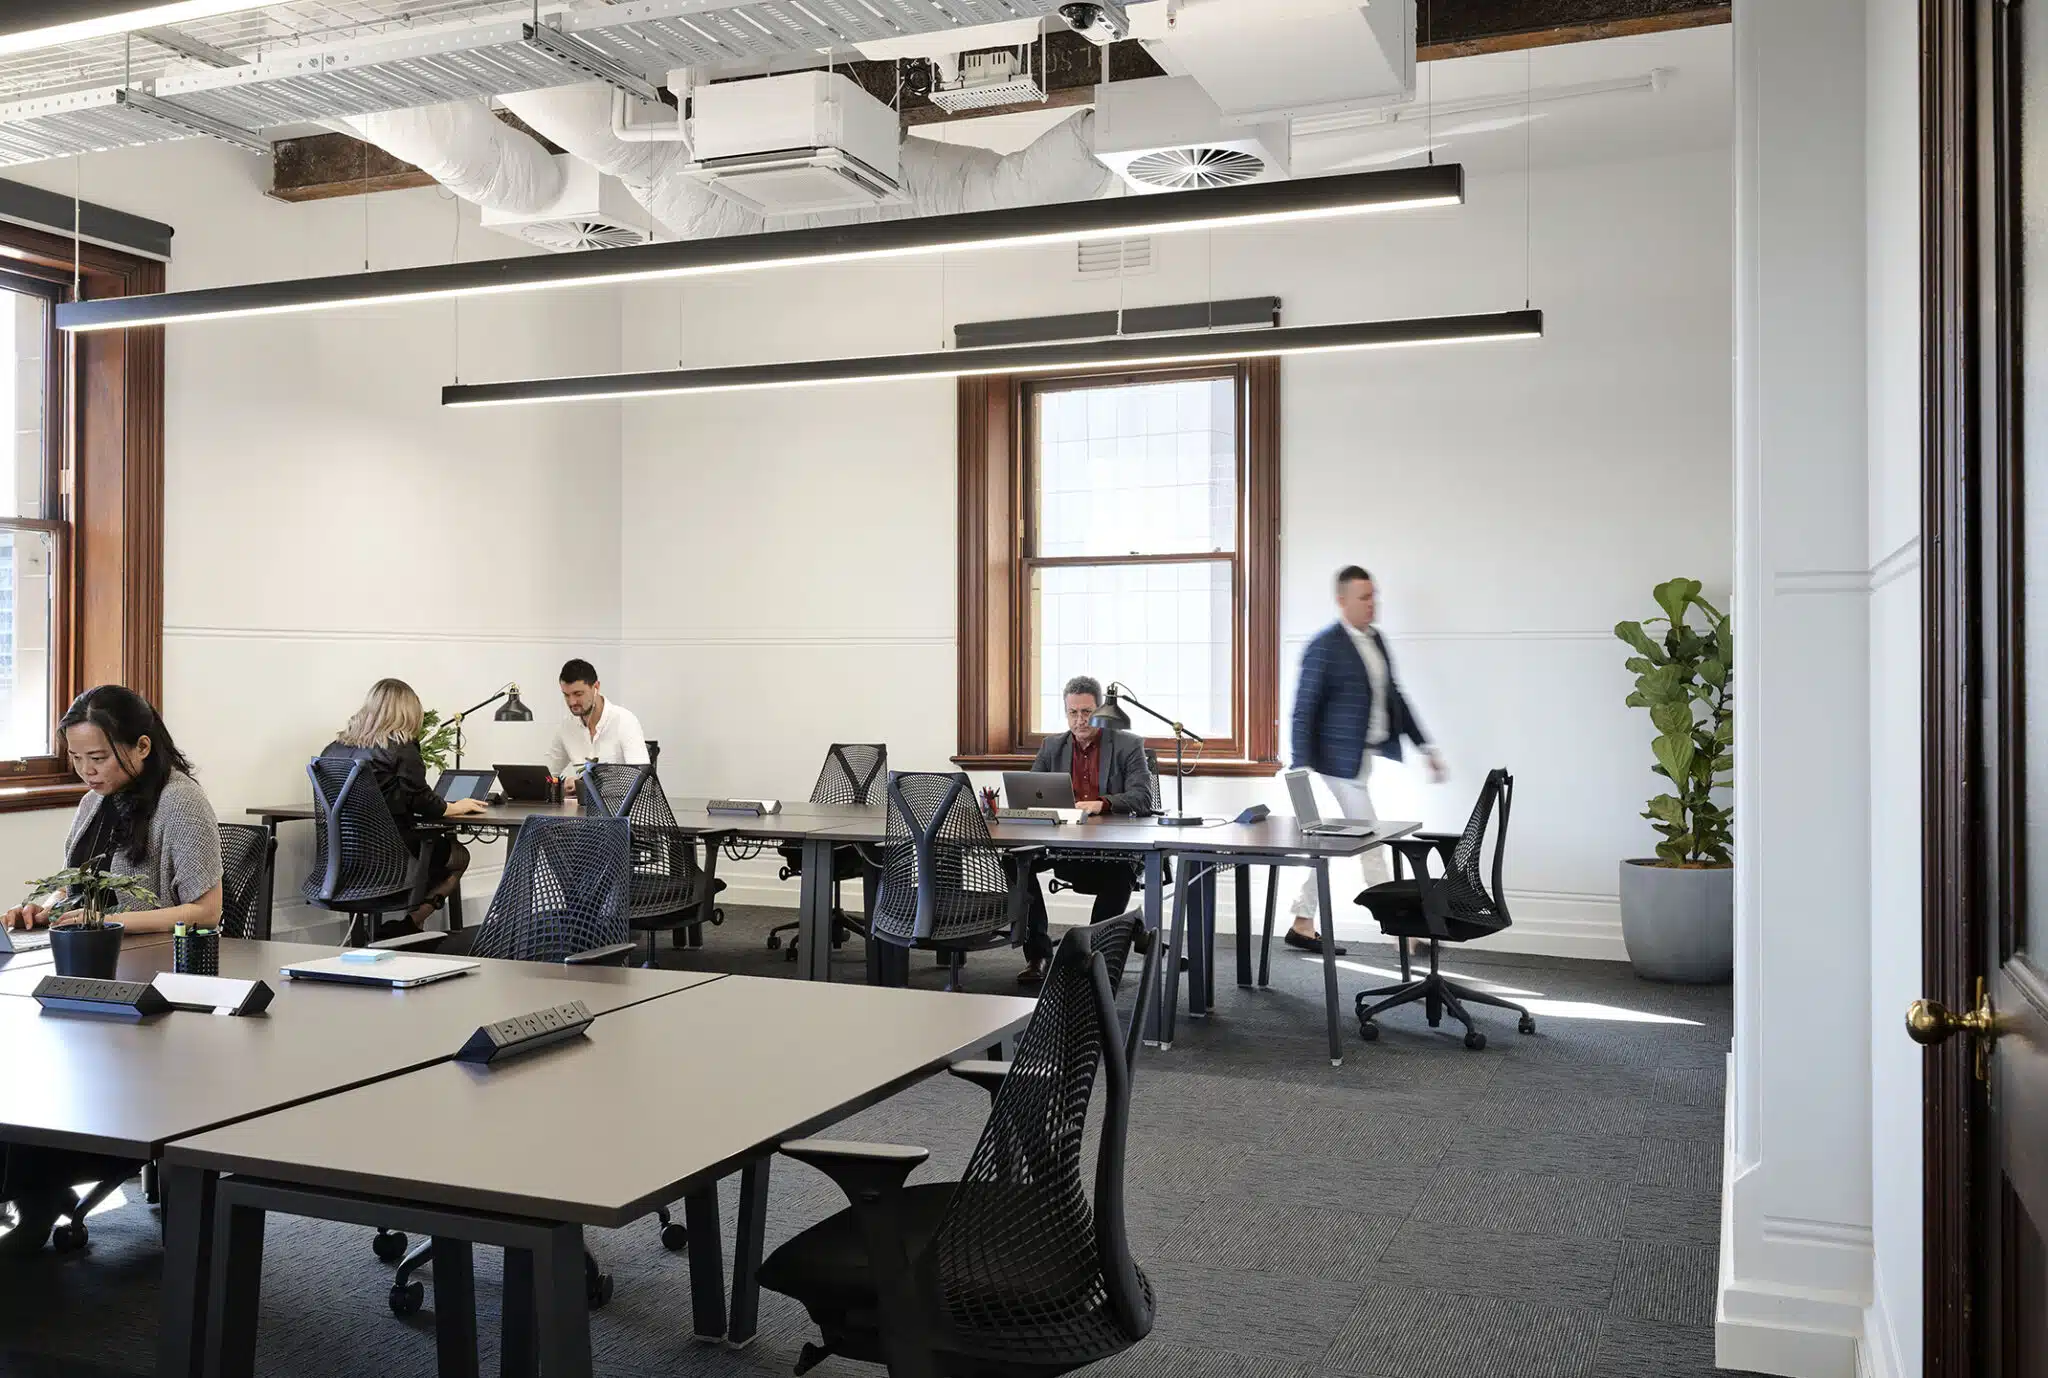  Serviced Office Space in Sydney Hub Australia provides fully-furnished serviced office spaces in Sydney for teams of 1 to 100, ready for your team to move in. Discover the flexible monthly terms of our premium serviced office spaces in our four Sydney locations.